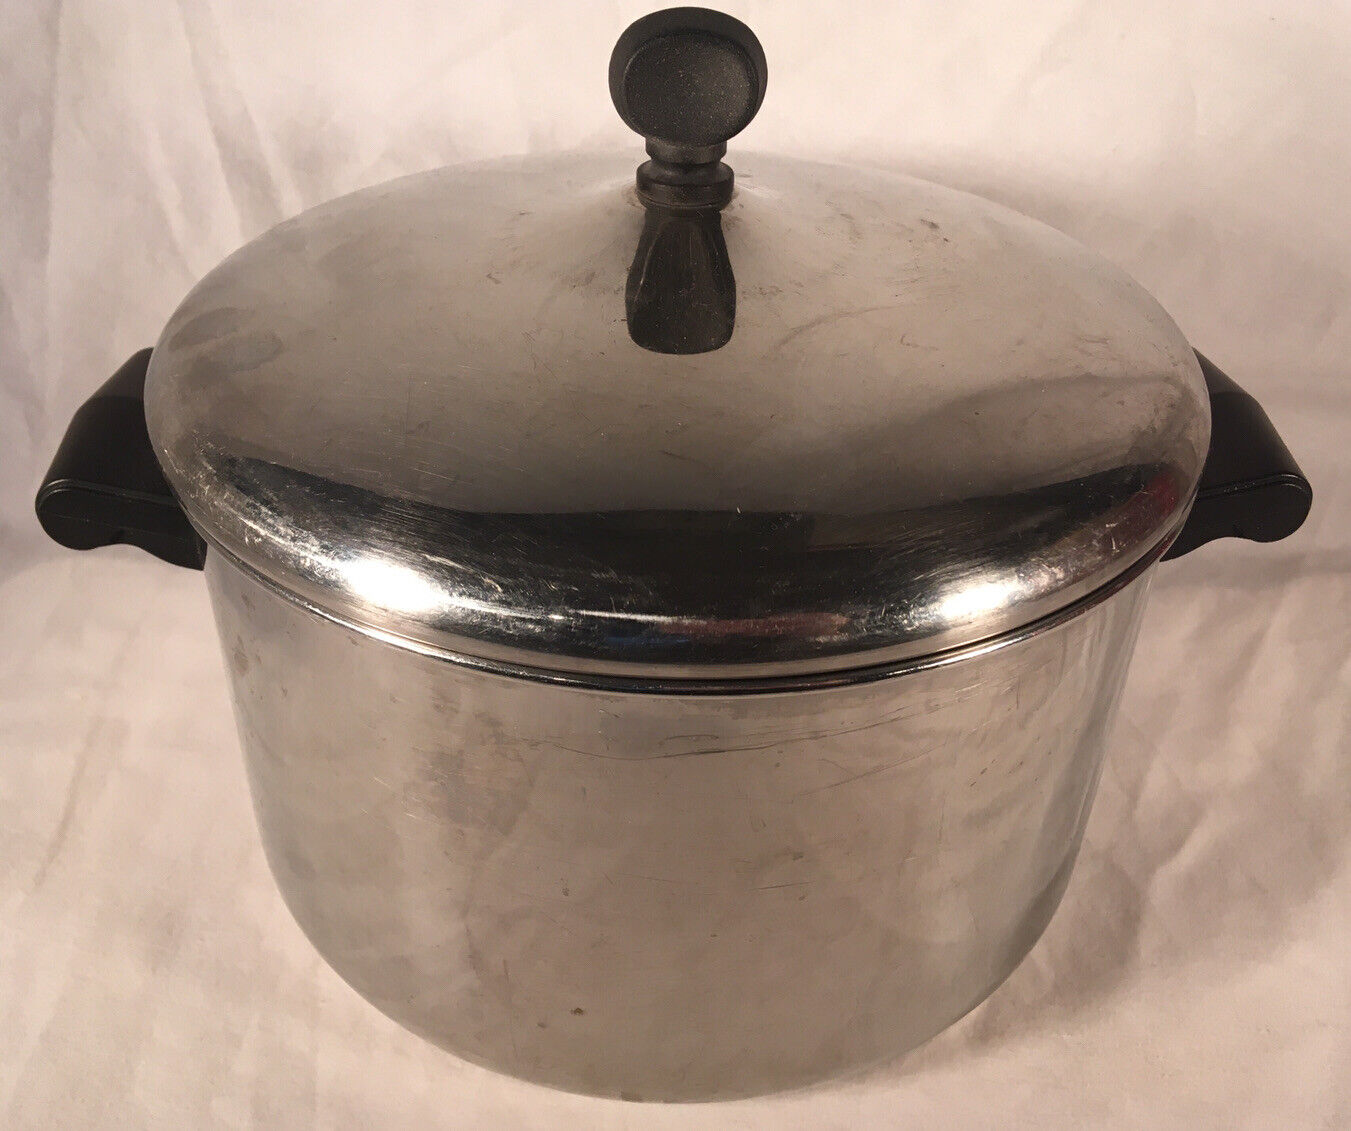 Vintage Farberware Aluminum Clad 4 Qt Stock Pot with Lid made in the Bronx Nice